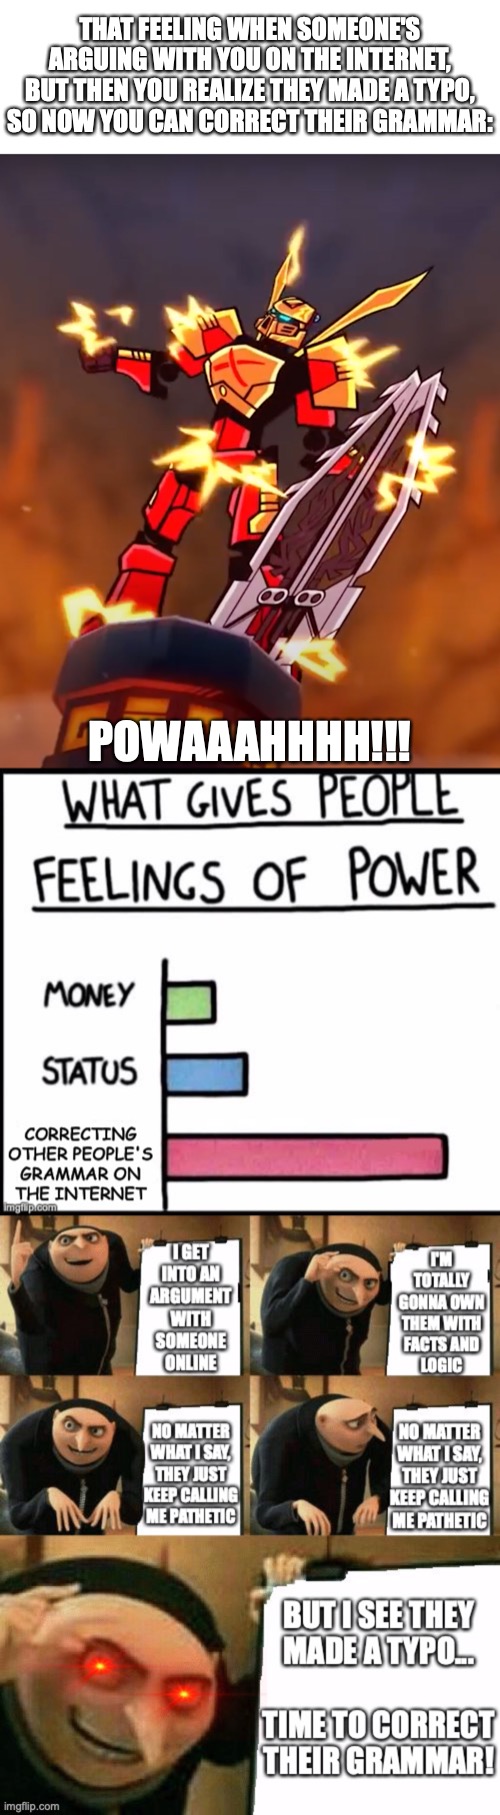 The Same Meme done 3 Different Ways: | THAT FEELING WHEN SOMEONE'S
ARGUING WITH YOU ON THE INTERNET,
BUT THEN YOU REALIZE THEY MADE A TYPO,
SO NOW YOU CAN CORRECT THEIR GRAMMAR:; POWAAAHHHH!!! | image tagged in powaaahhhh,power bar graph,gru's plan,what gives people feelings of power,correcting other people's grammar on the internet,gram | made w/ Imgflip meme maker